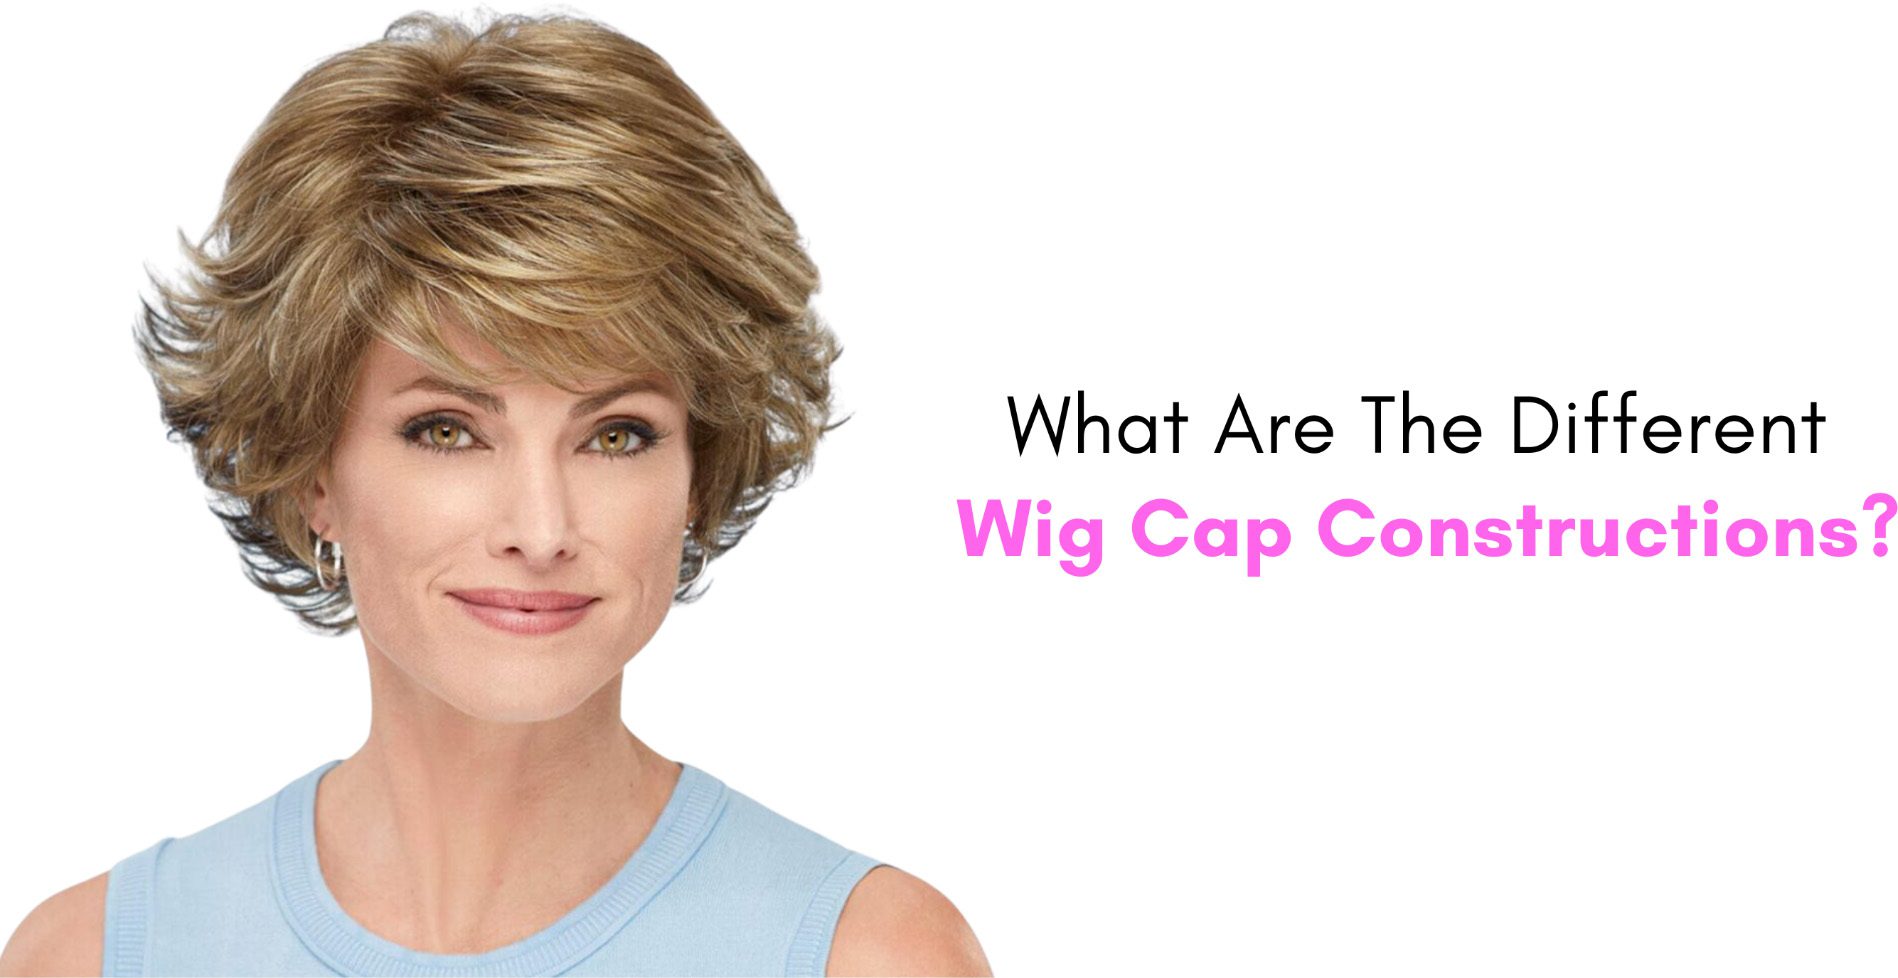 What Are The Different Wig Cap Constructions?